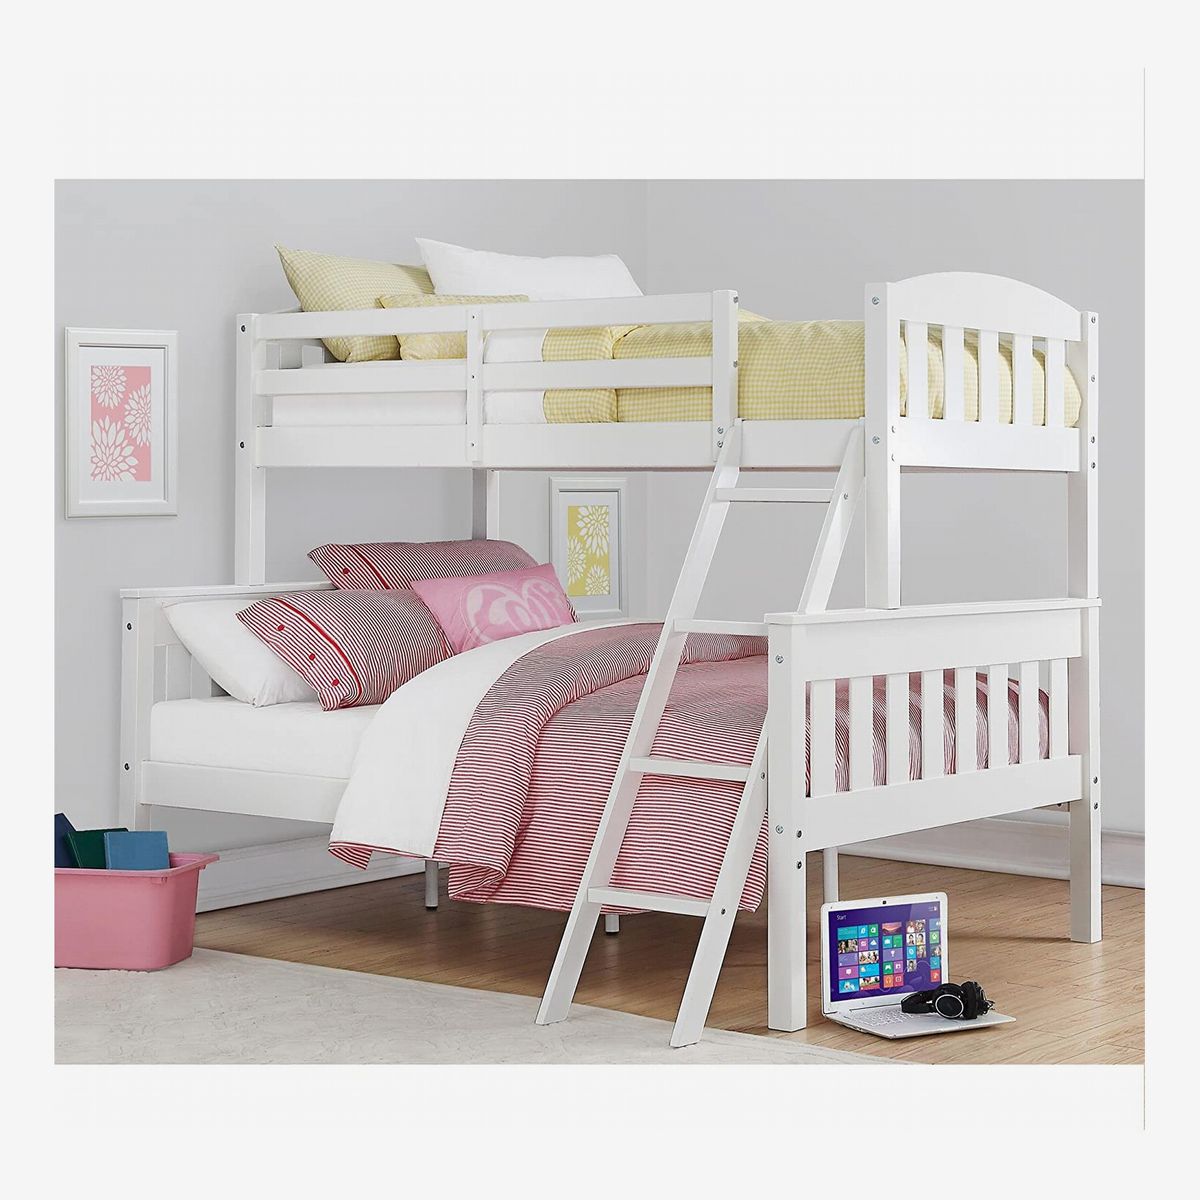 8 Best Bunk Beds 2020 The Strategist, Girls White Bunk Beds